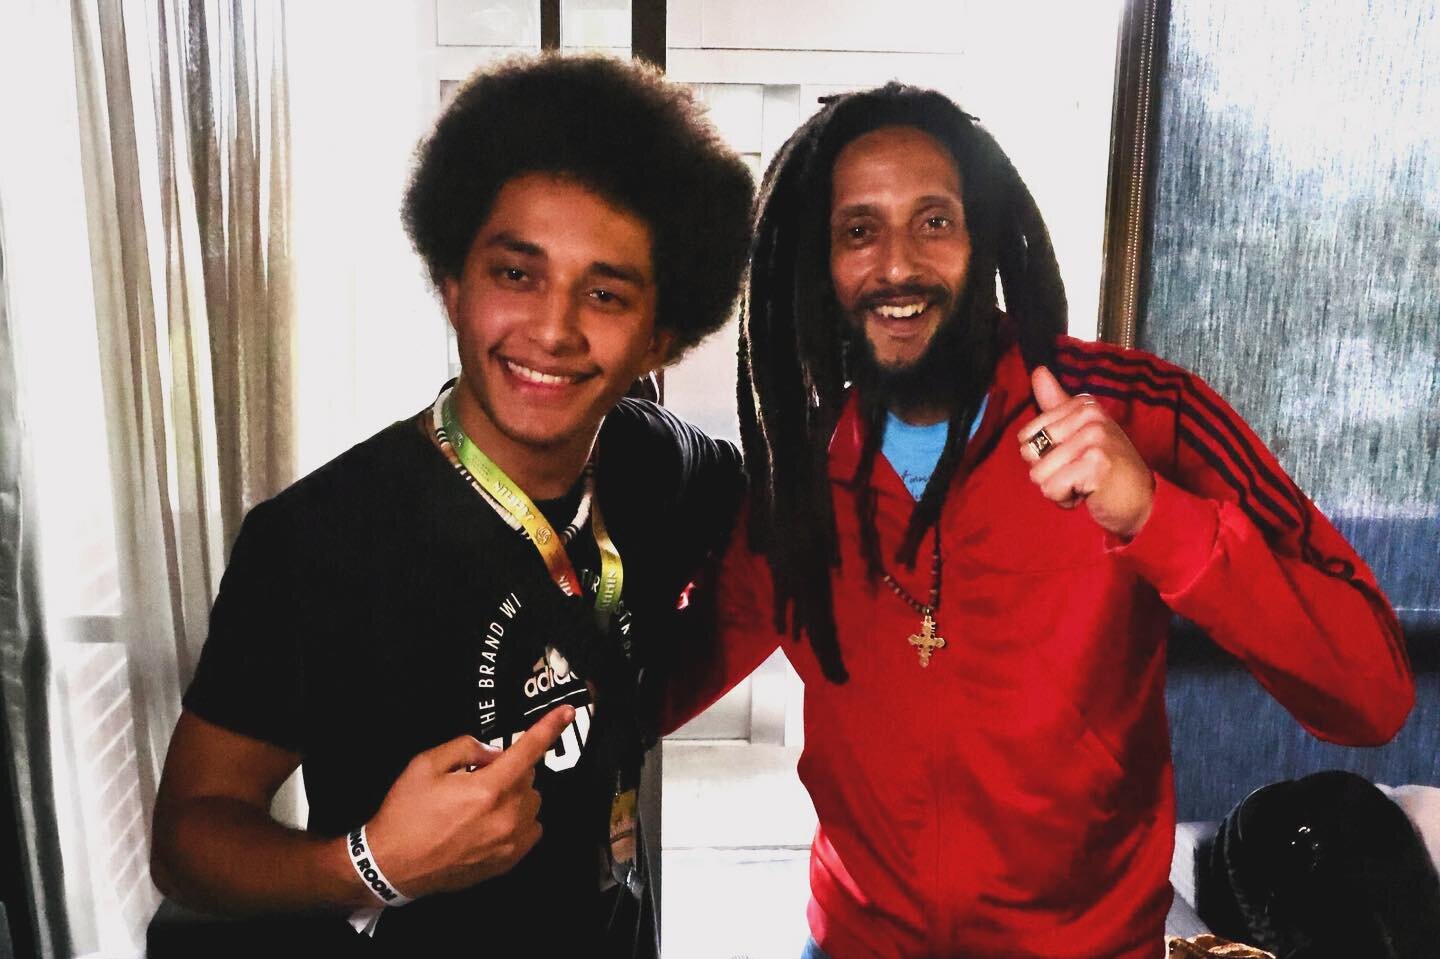 When was a 9 year old kid, I met @julianrmarley yesterday I met him again, but this time I understood the significance of his and his family&rsquo;s legacy.  On the same day, Julian won a Grammy Award.  It was a surreal experience, but I&rsquo;m grat